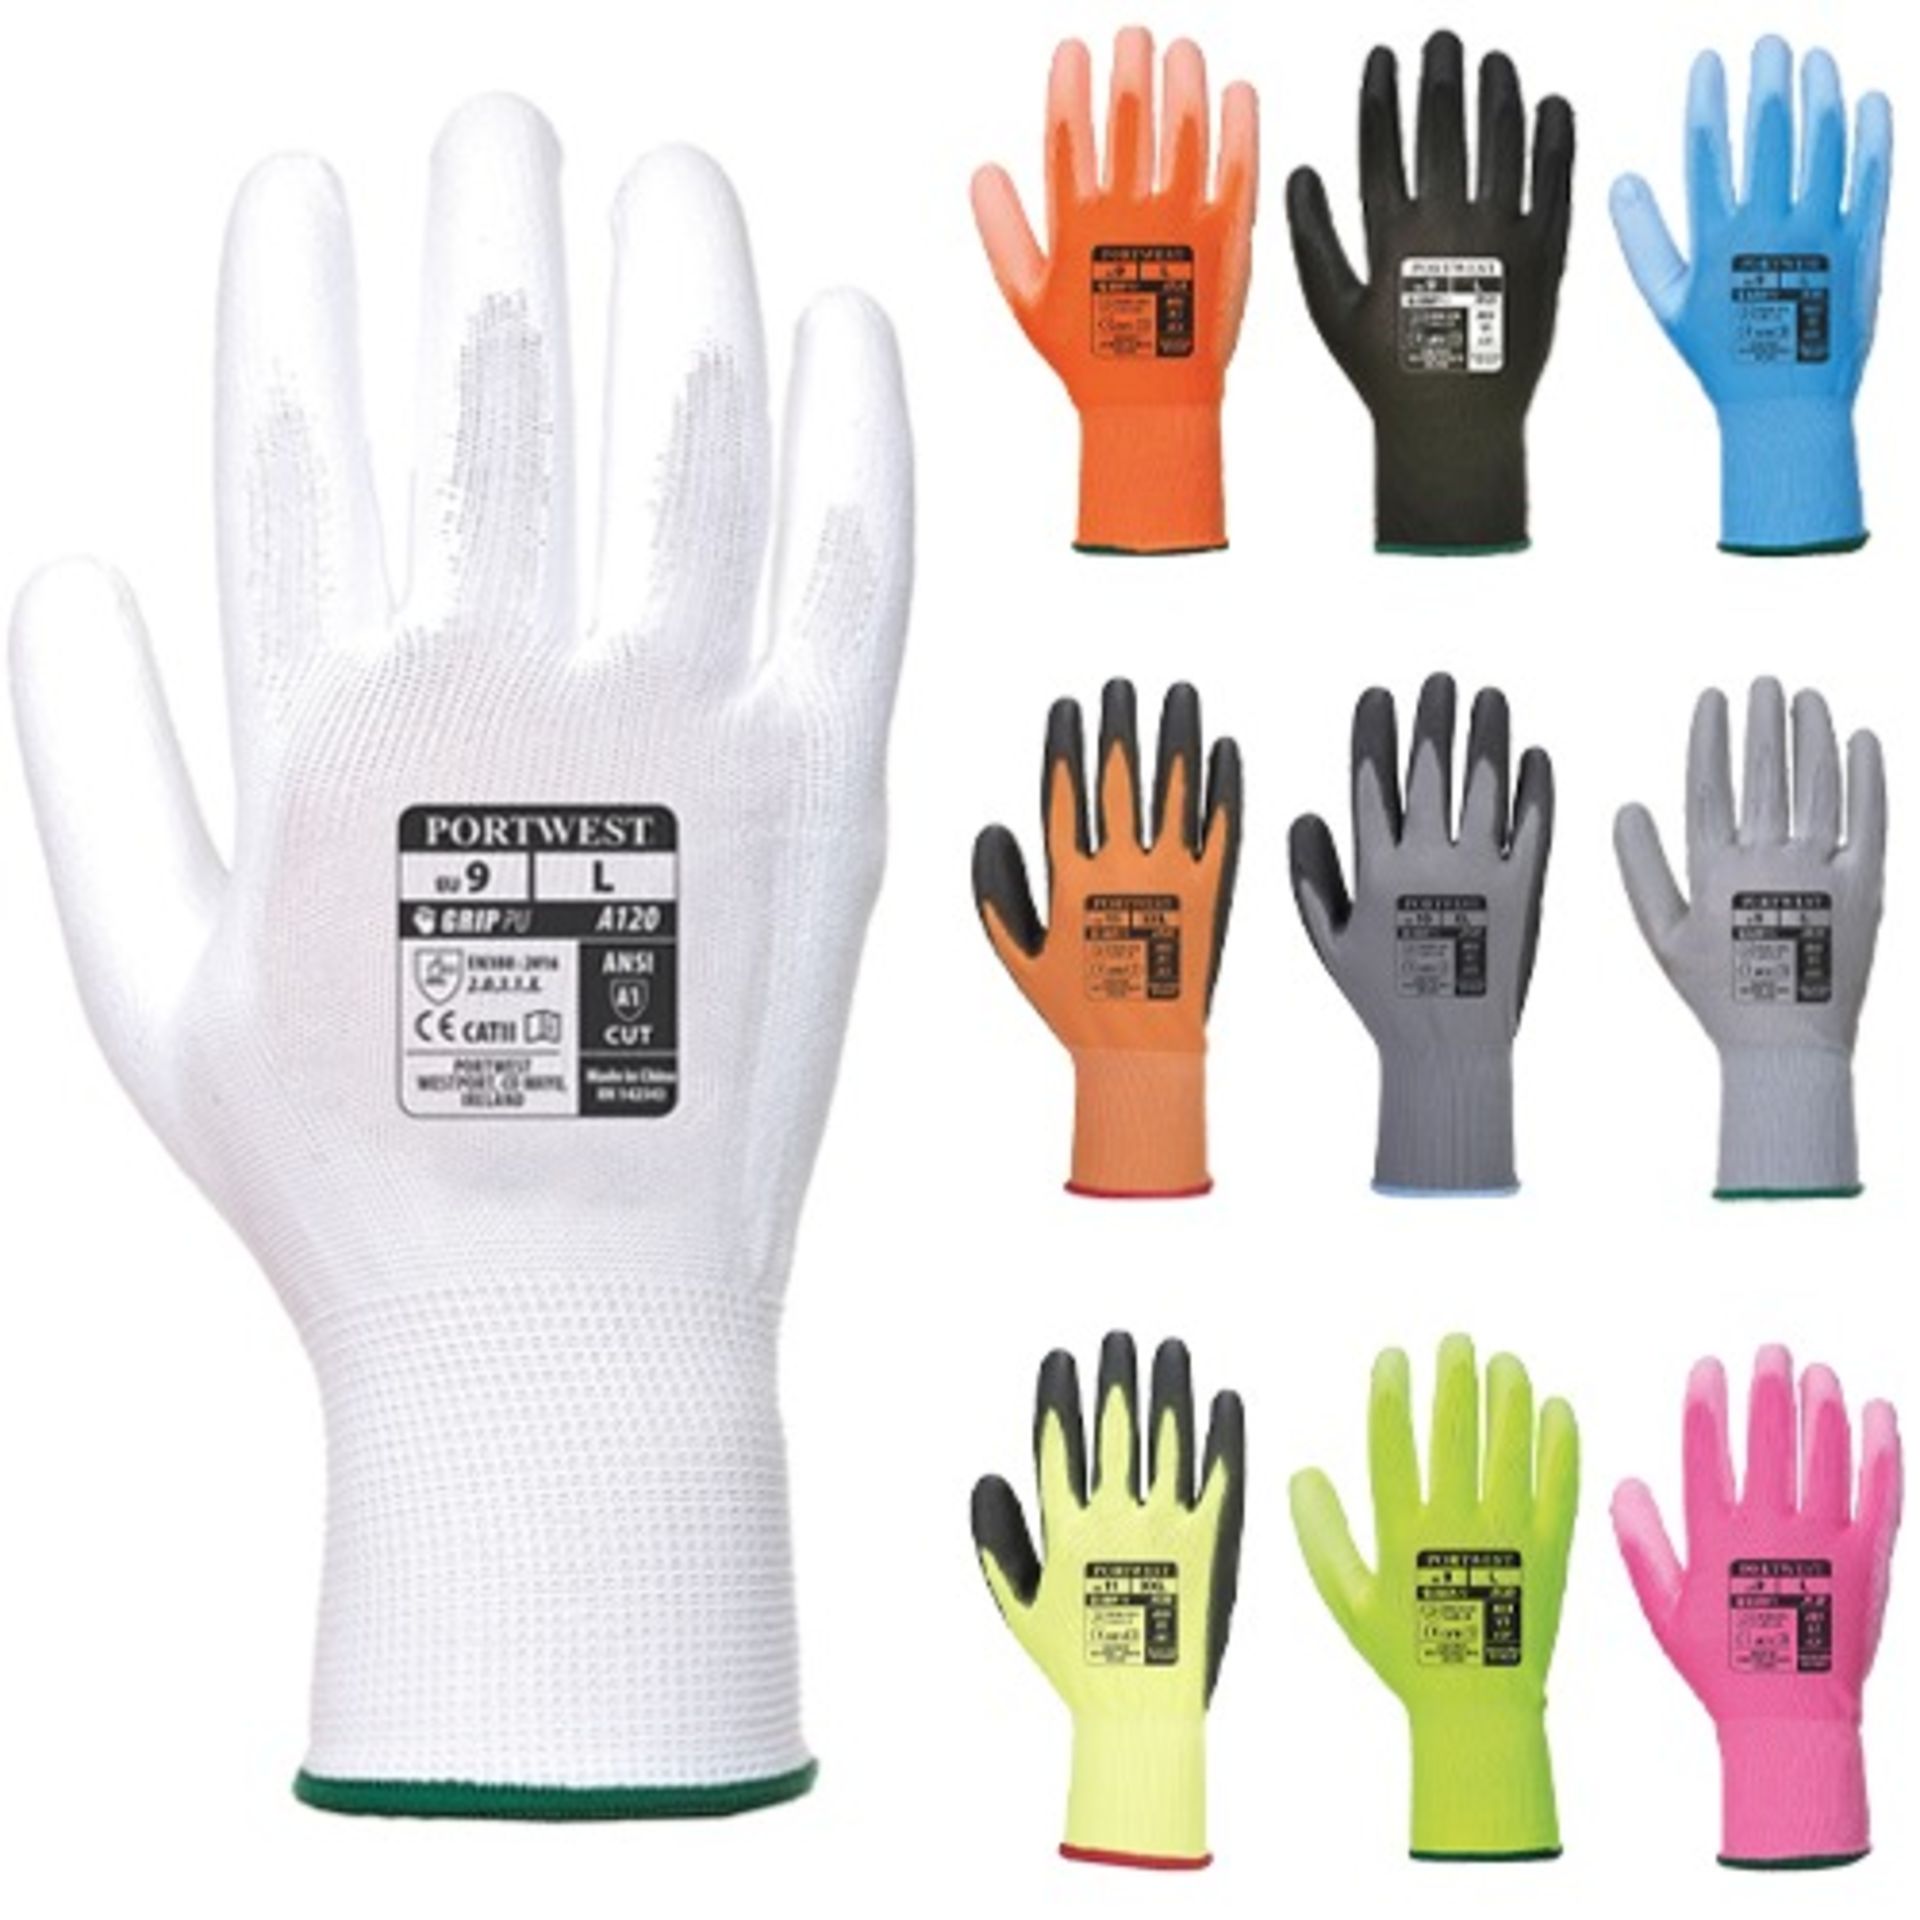 70x Brand New Portwest A120 Yellow pairs of PU Palm Gloves - XL RRP £1.09 Each (R40)